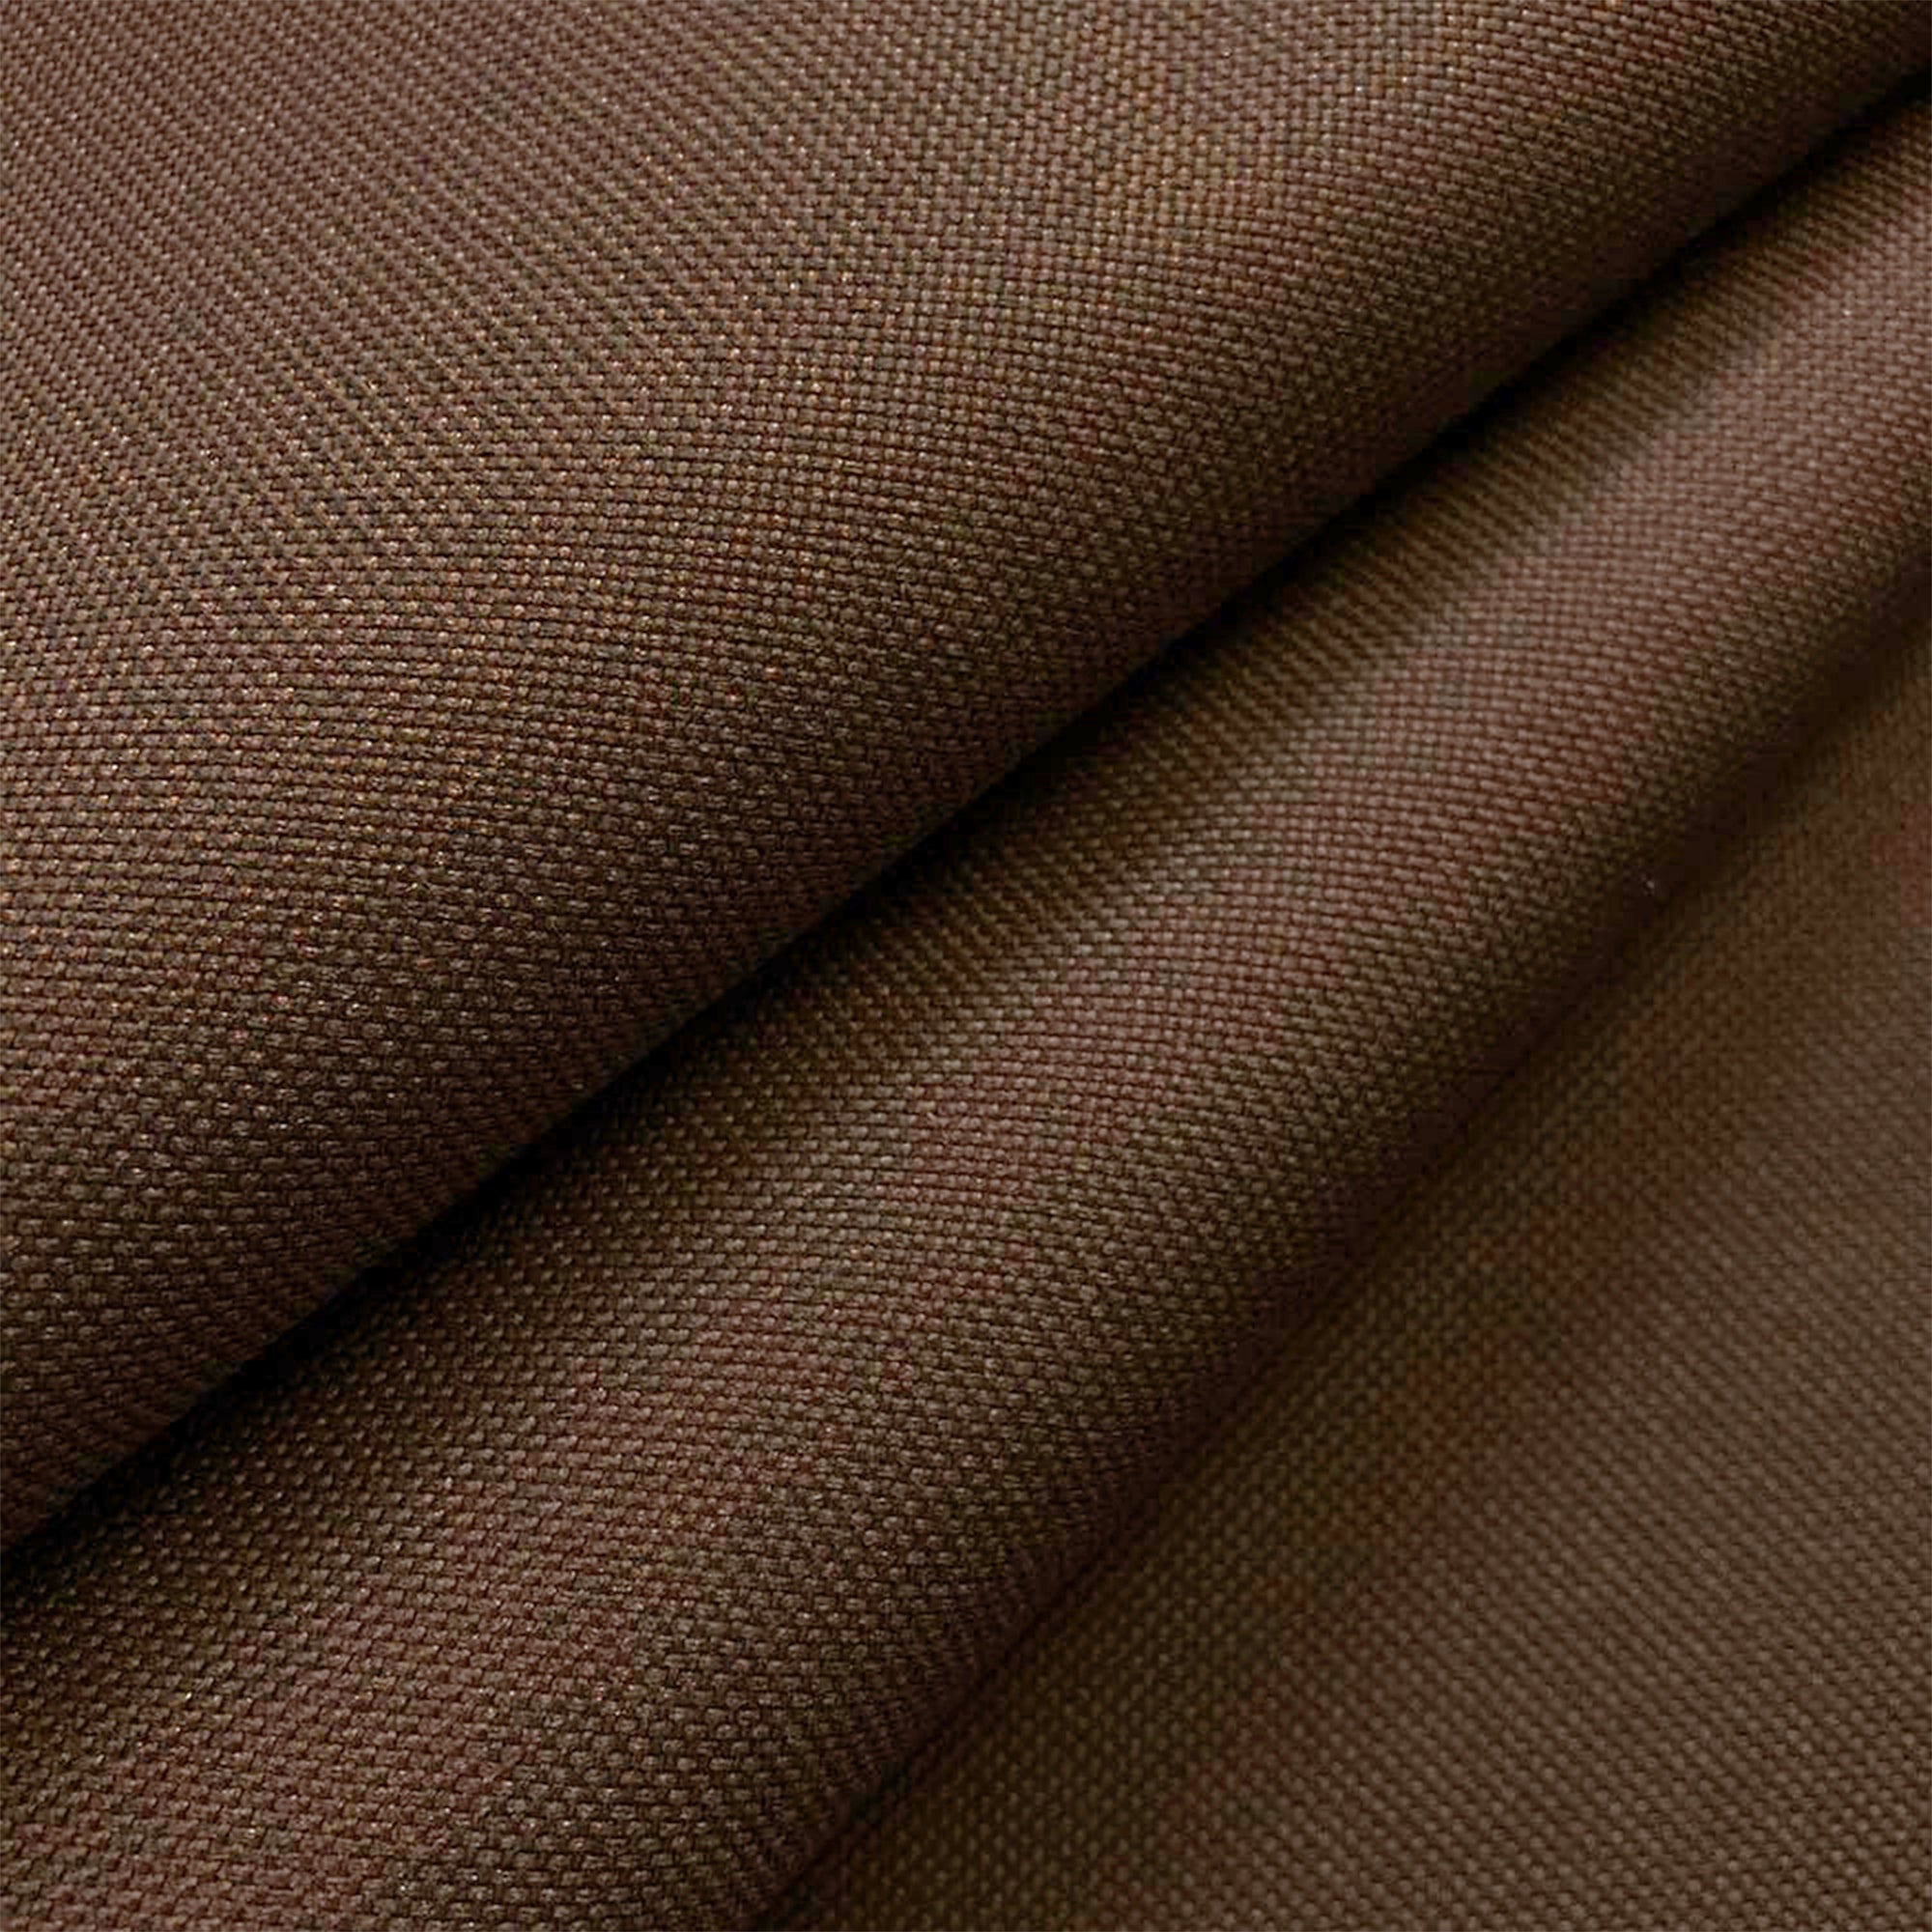  GeeComfy Waterproof Canvas Fabric by The Yard 58 W 600D  Upholstery Polyester Material Indoor Outdoor Water Resistant Fabric for  Chair Cushion Furniture Cover Sewing DIY Cloth, 1 Yard Red : Arts